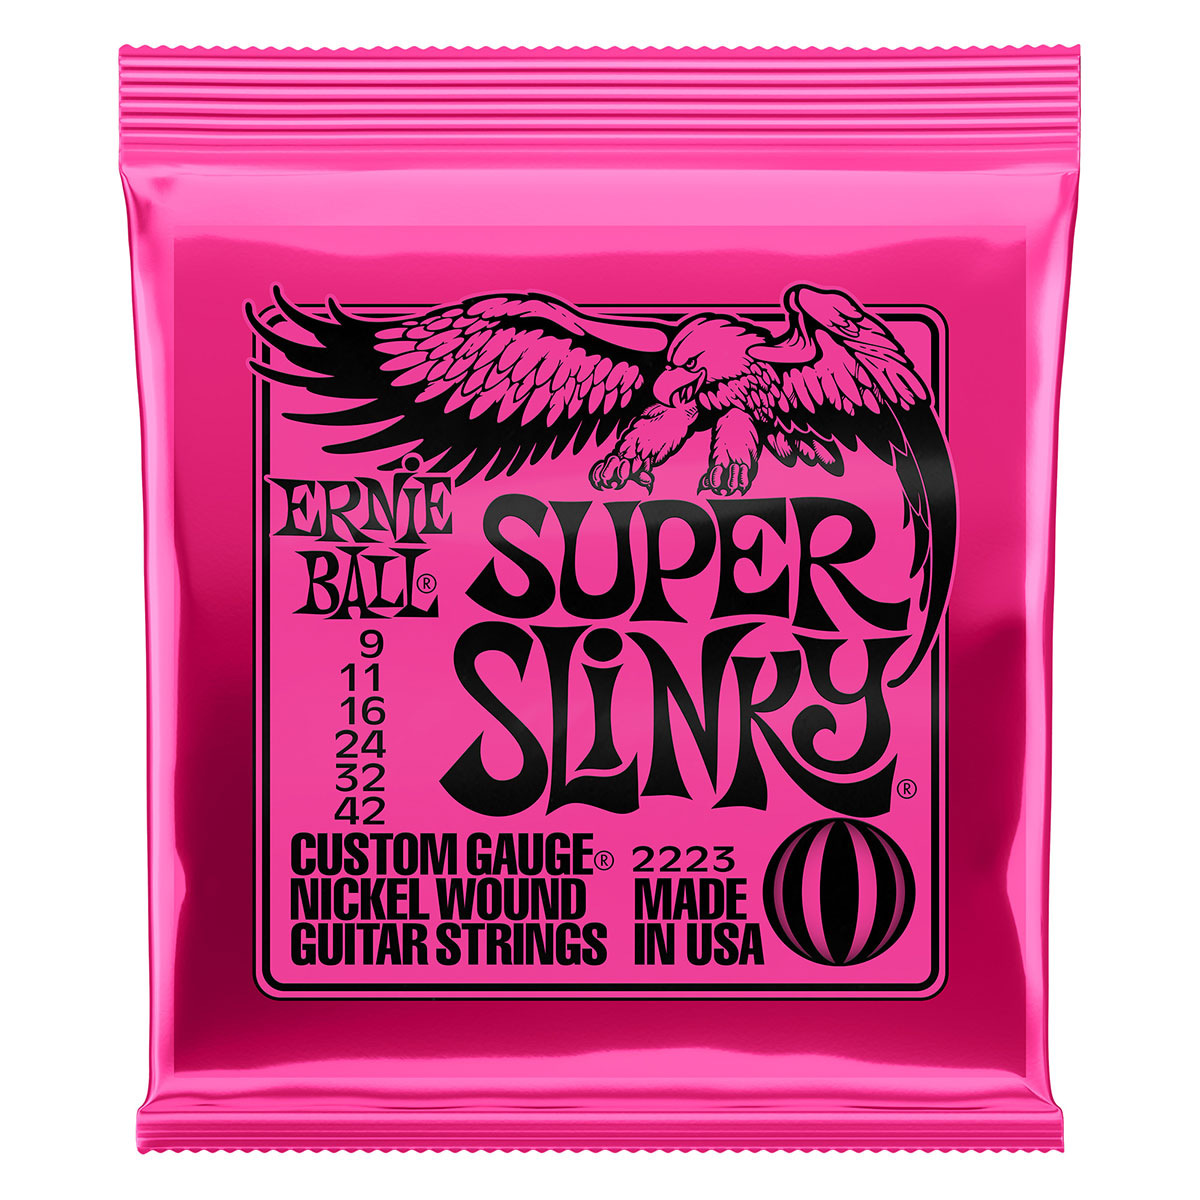 An image of Ernie Ball 2223 Super Slinky Guitar Strings 9-42 - Gift for a Guitarist | PMT On...